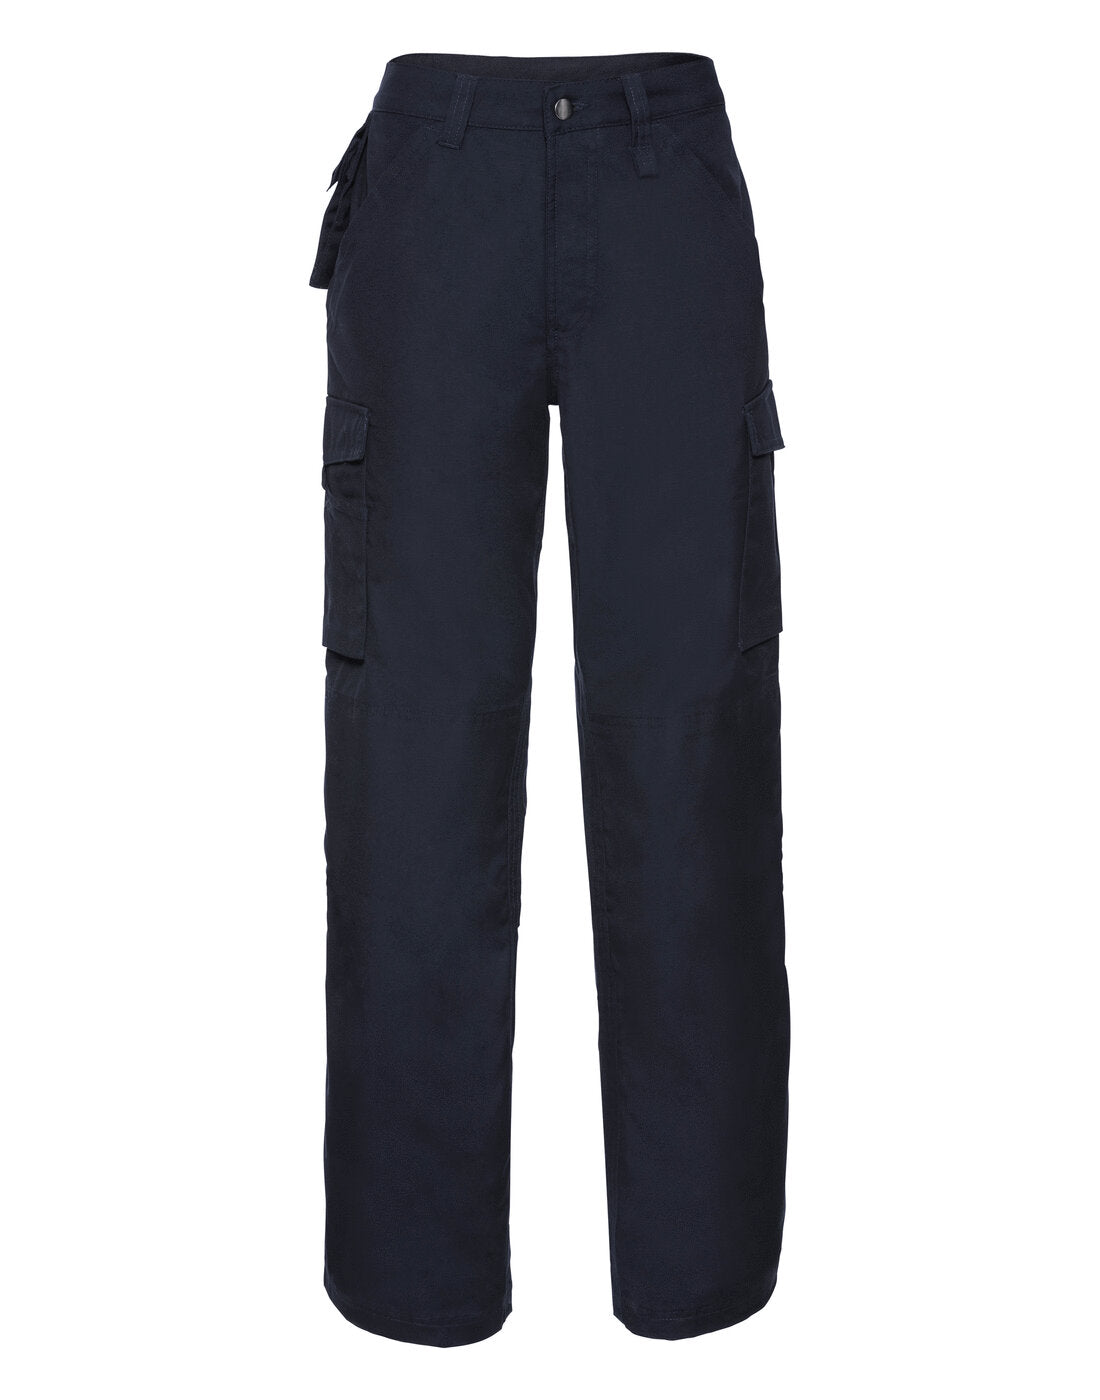 Russell Heavy Duty Workwear Trousers - French Navy